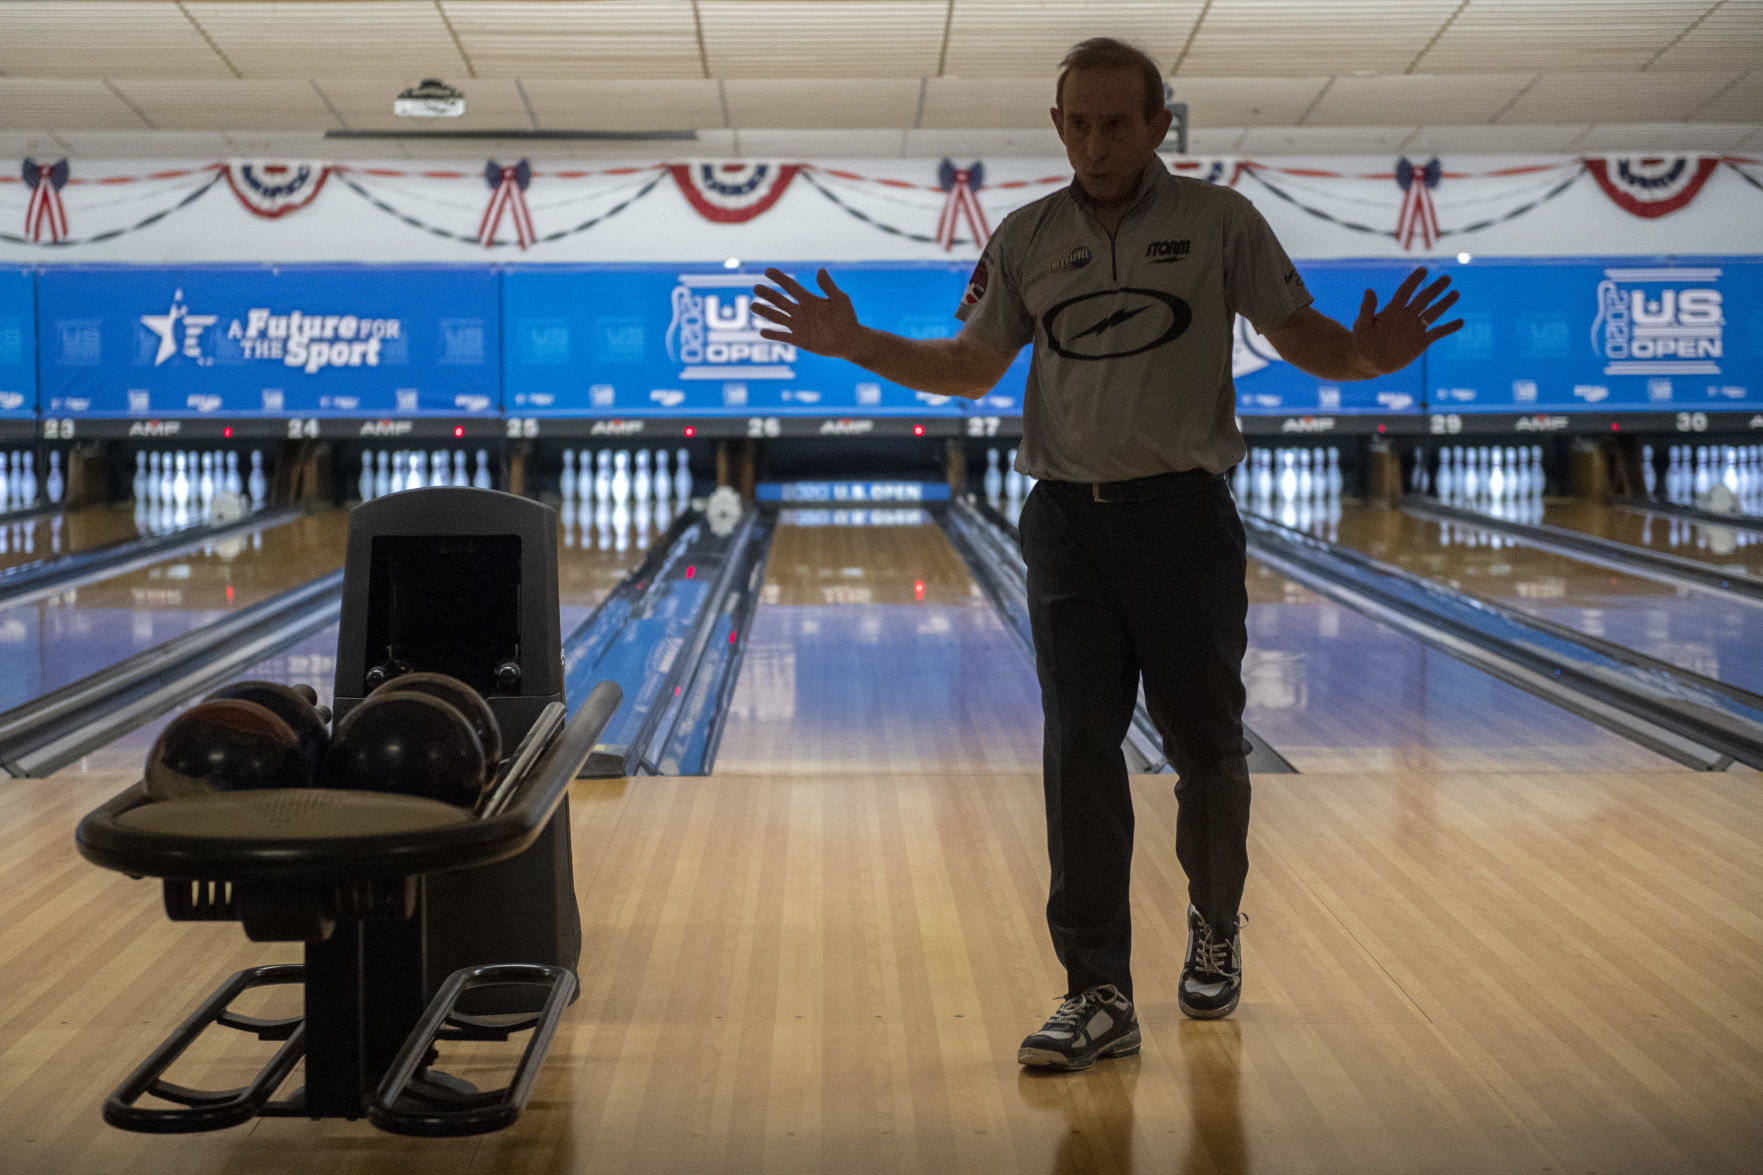 Hastings College senior puts homework on pause, but for good reason Hes bowling in the US Open